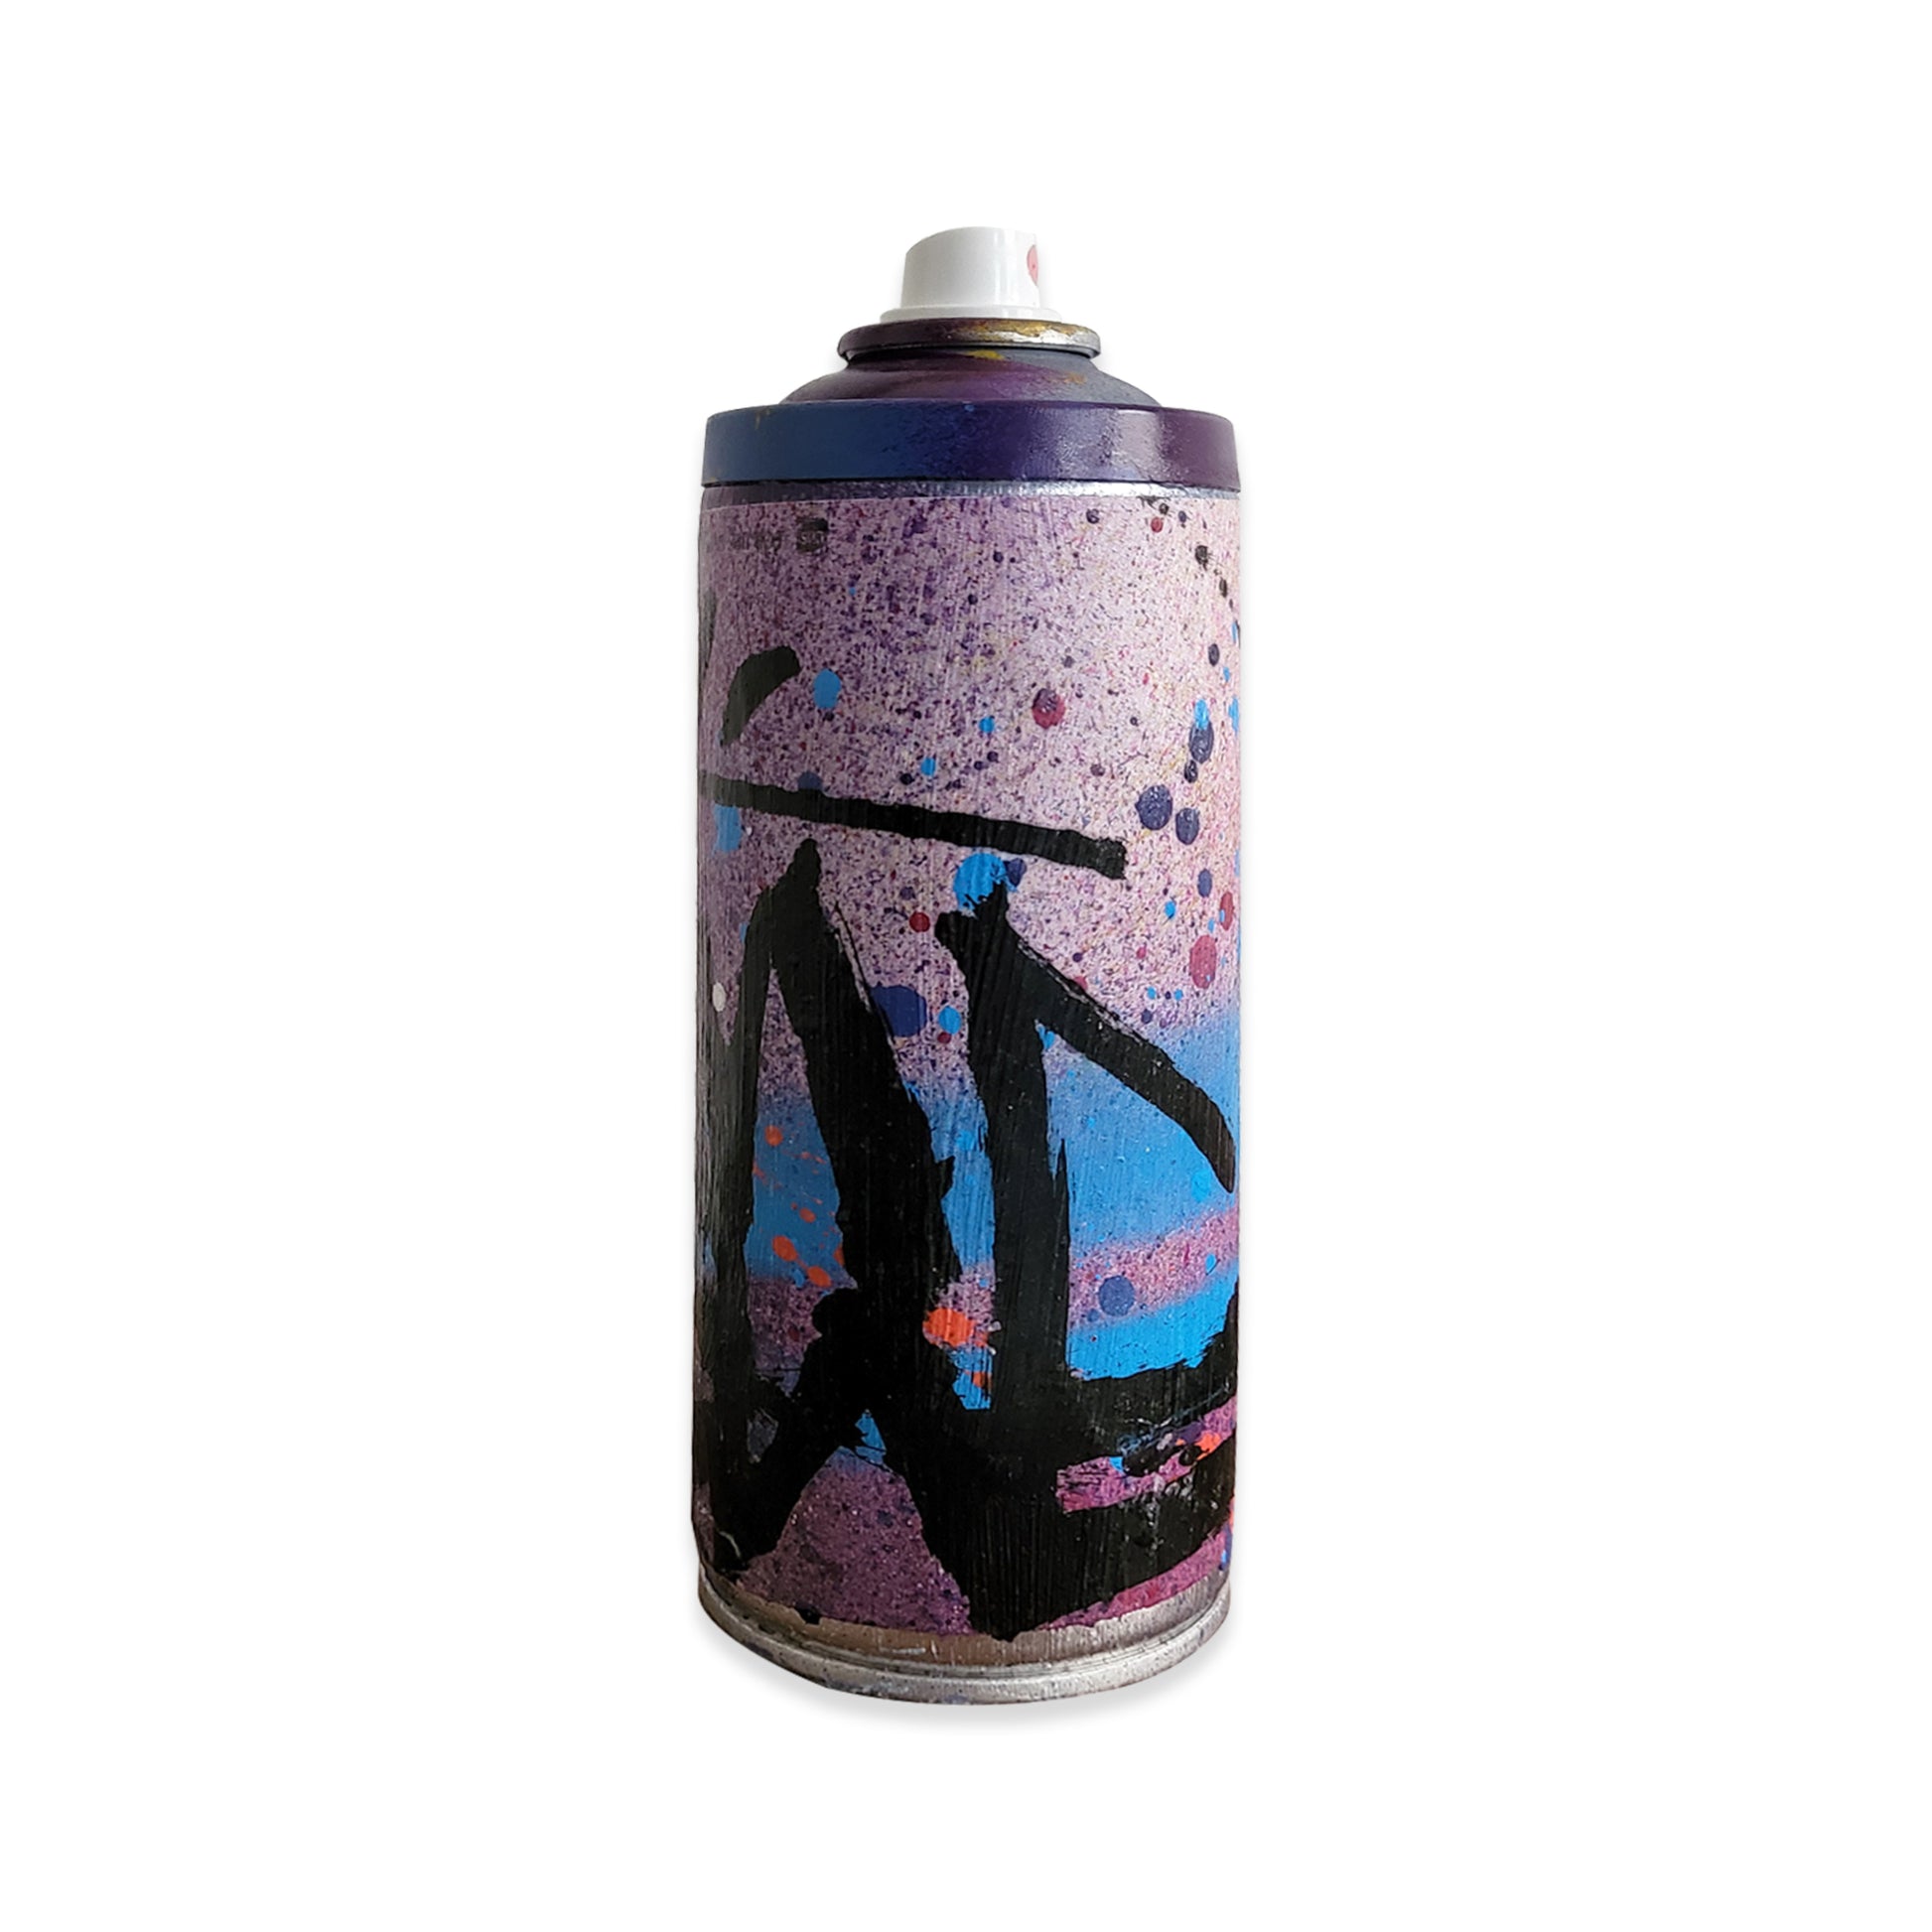 Artist hand-painted, empty spray paint can by graffiti artist Man One, side two.